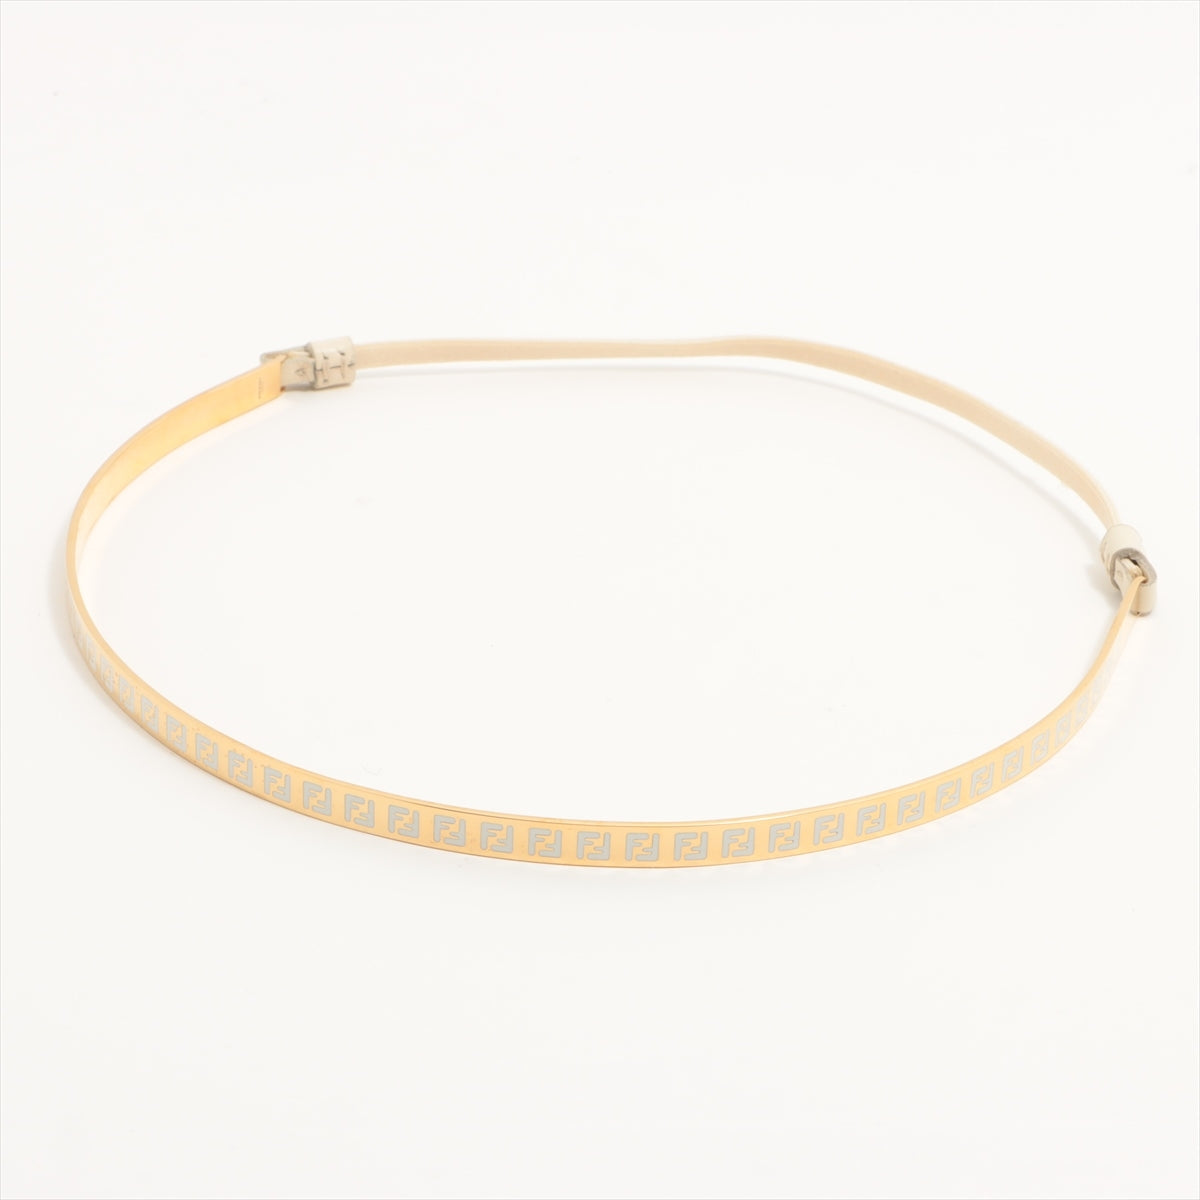 Fendi Headband GP Gold Scratched Wears Losing luster Discoloration Stained 8AH366